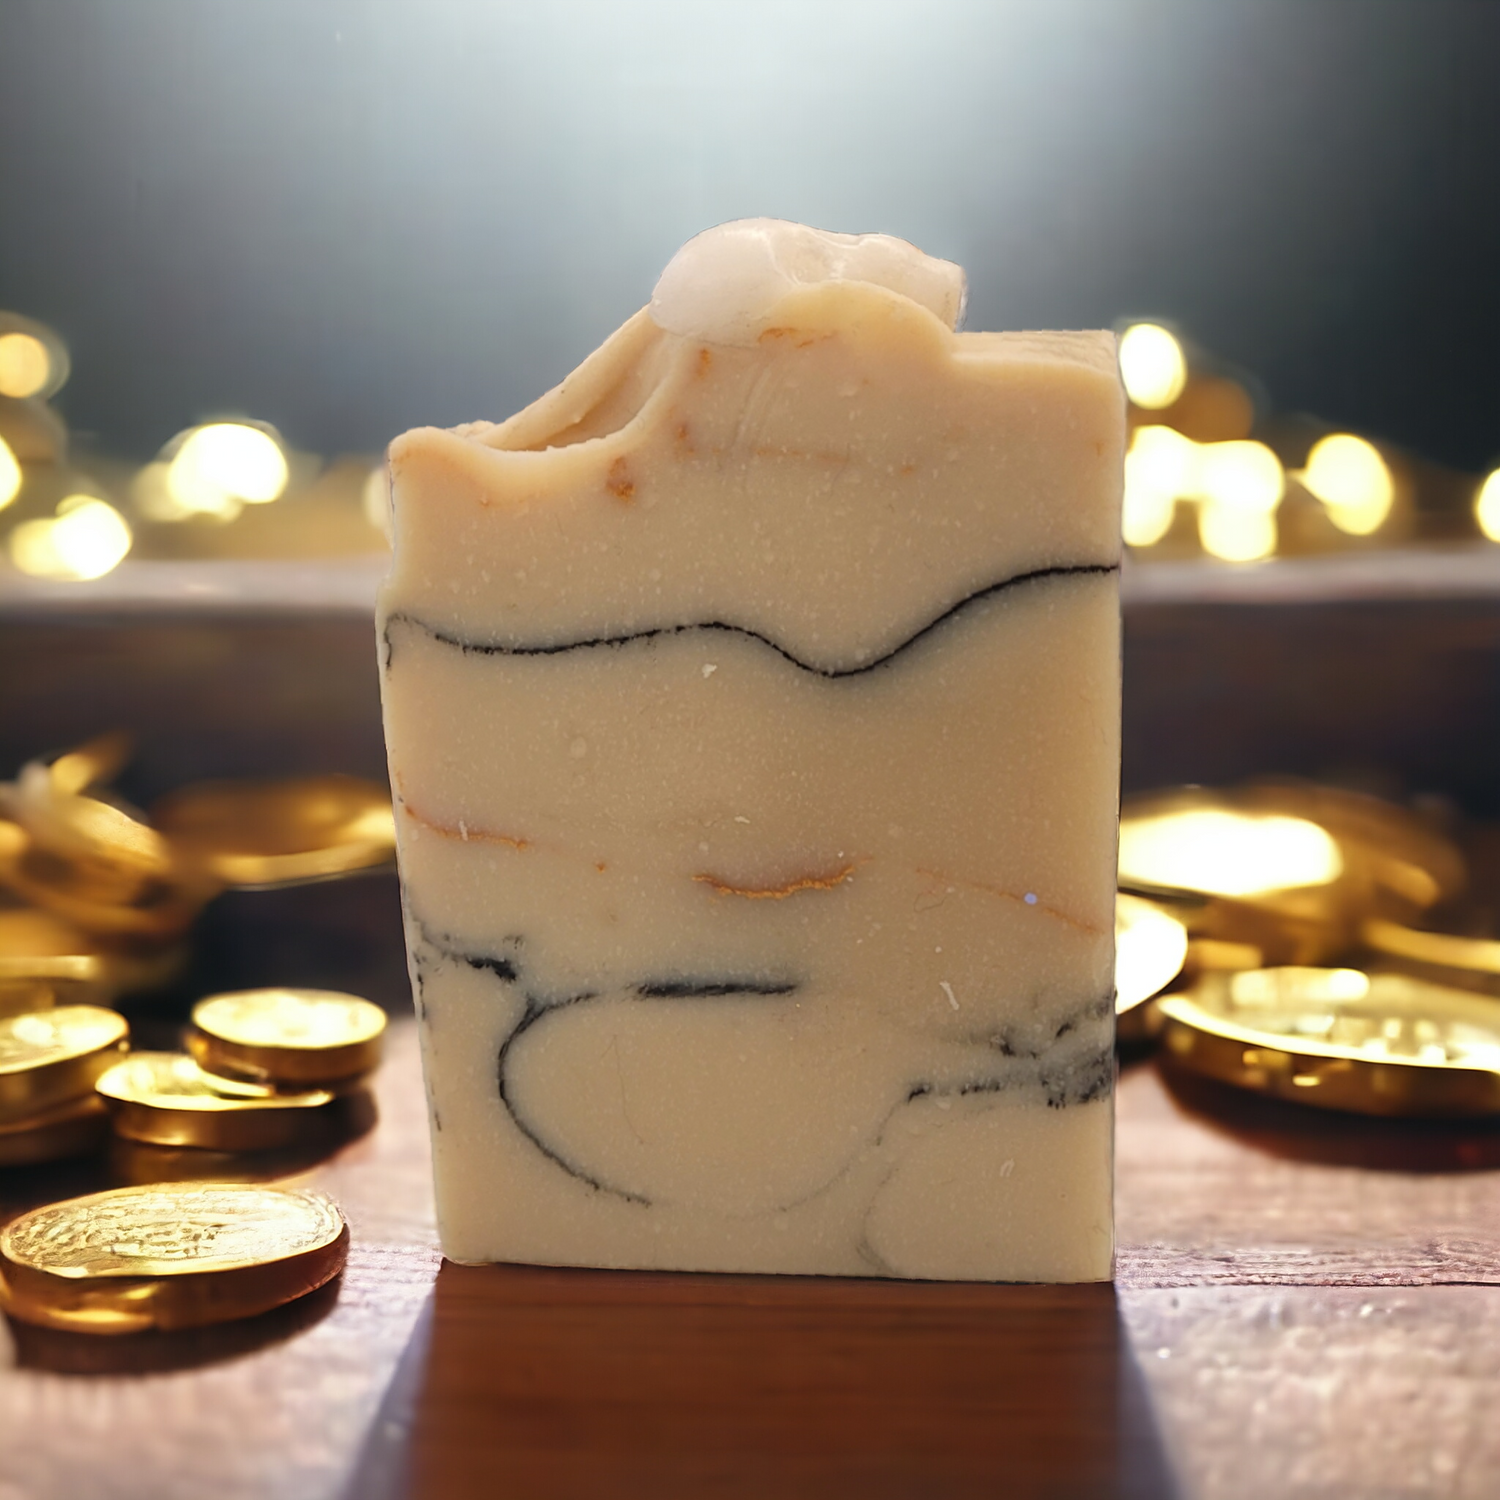 Gold Tooth Pirate Soap is white with lines of black charcoal and gold dust with a pirate skull on top by The Blue Pelican Bath & Body